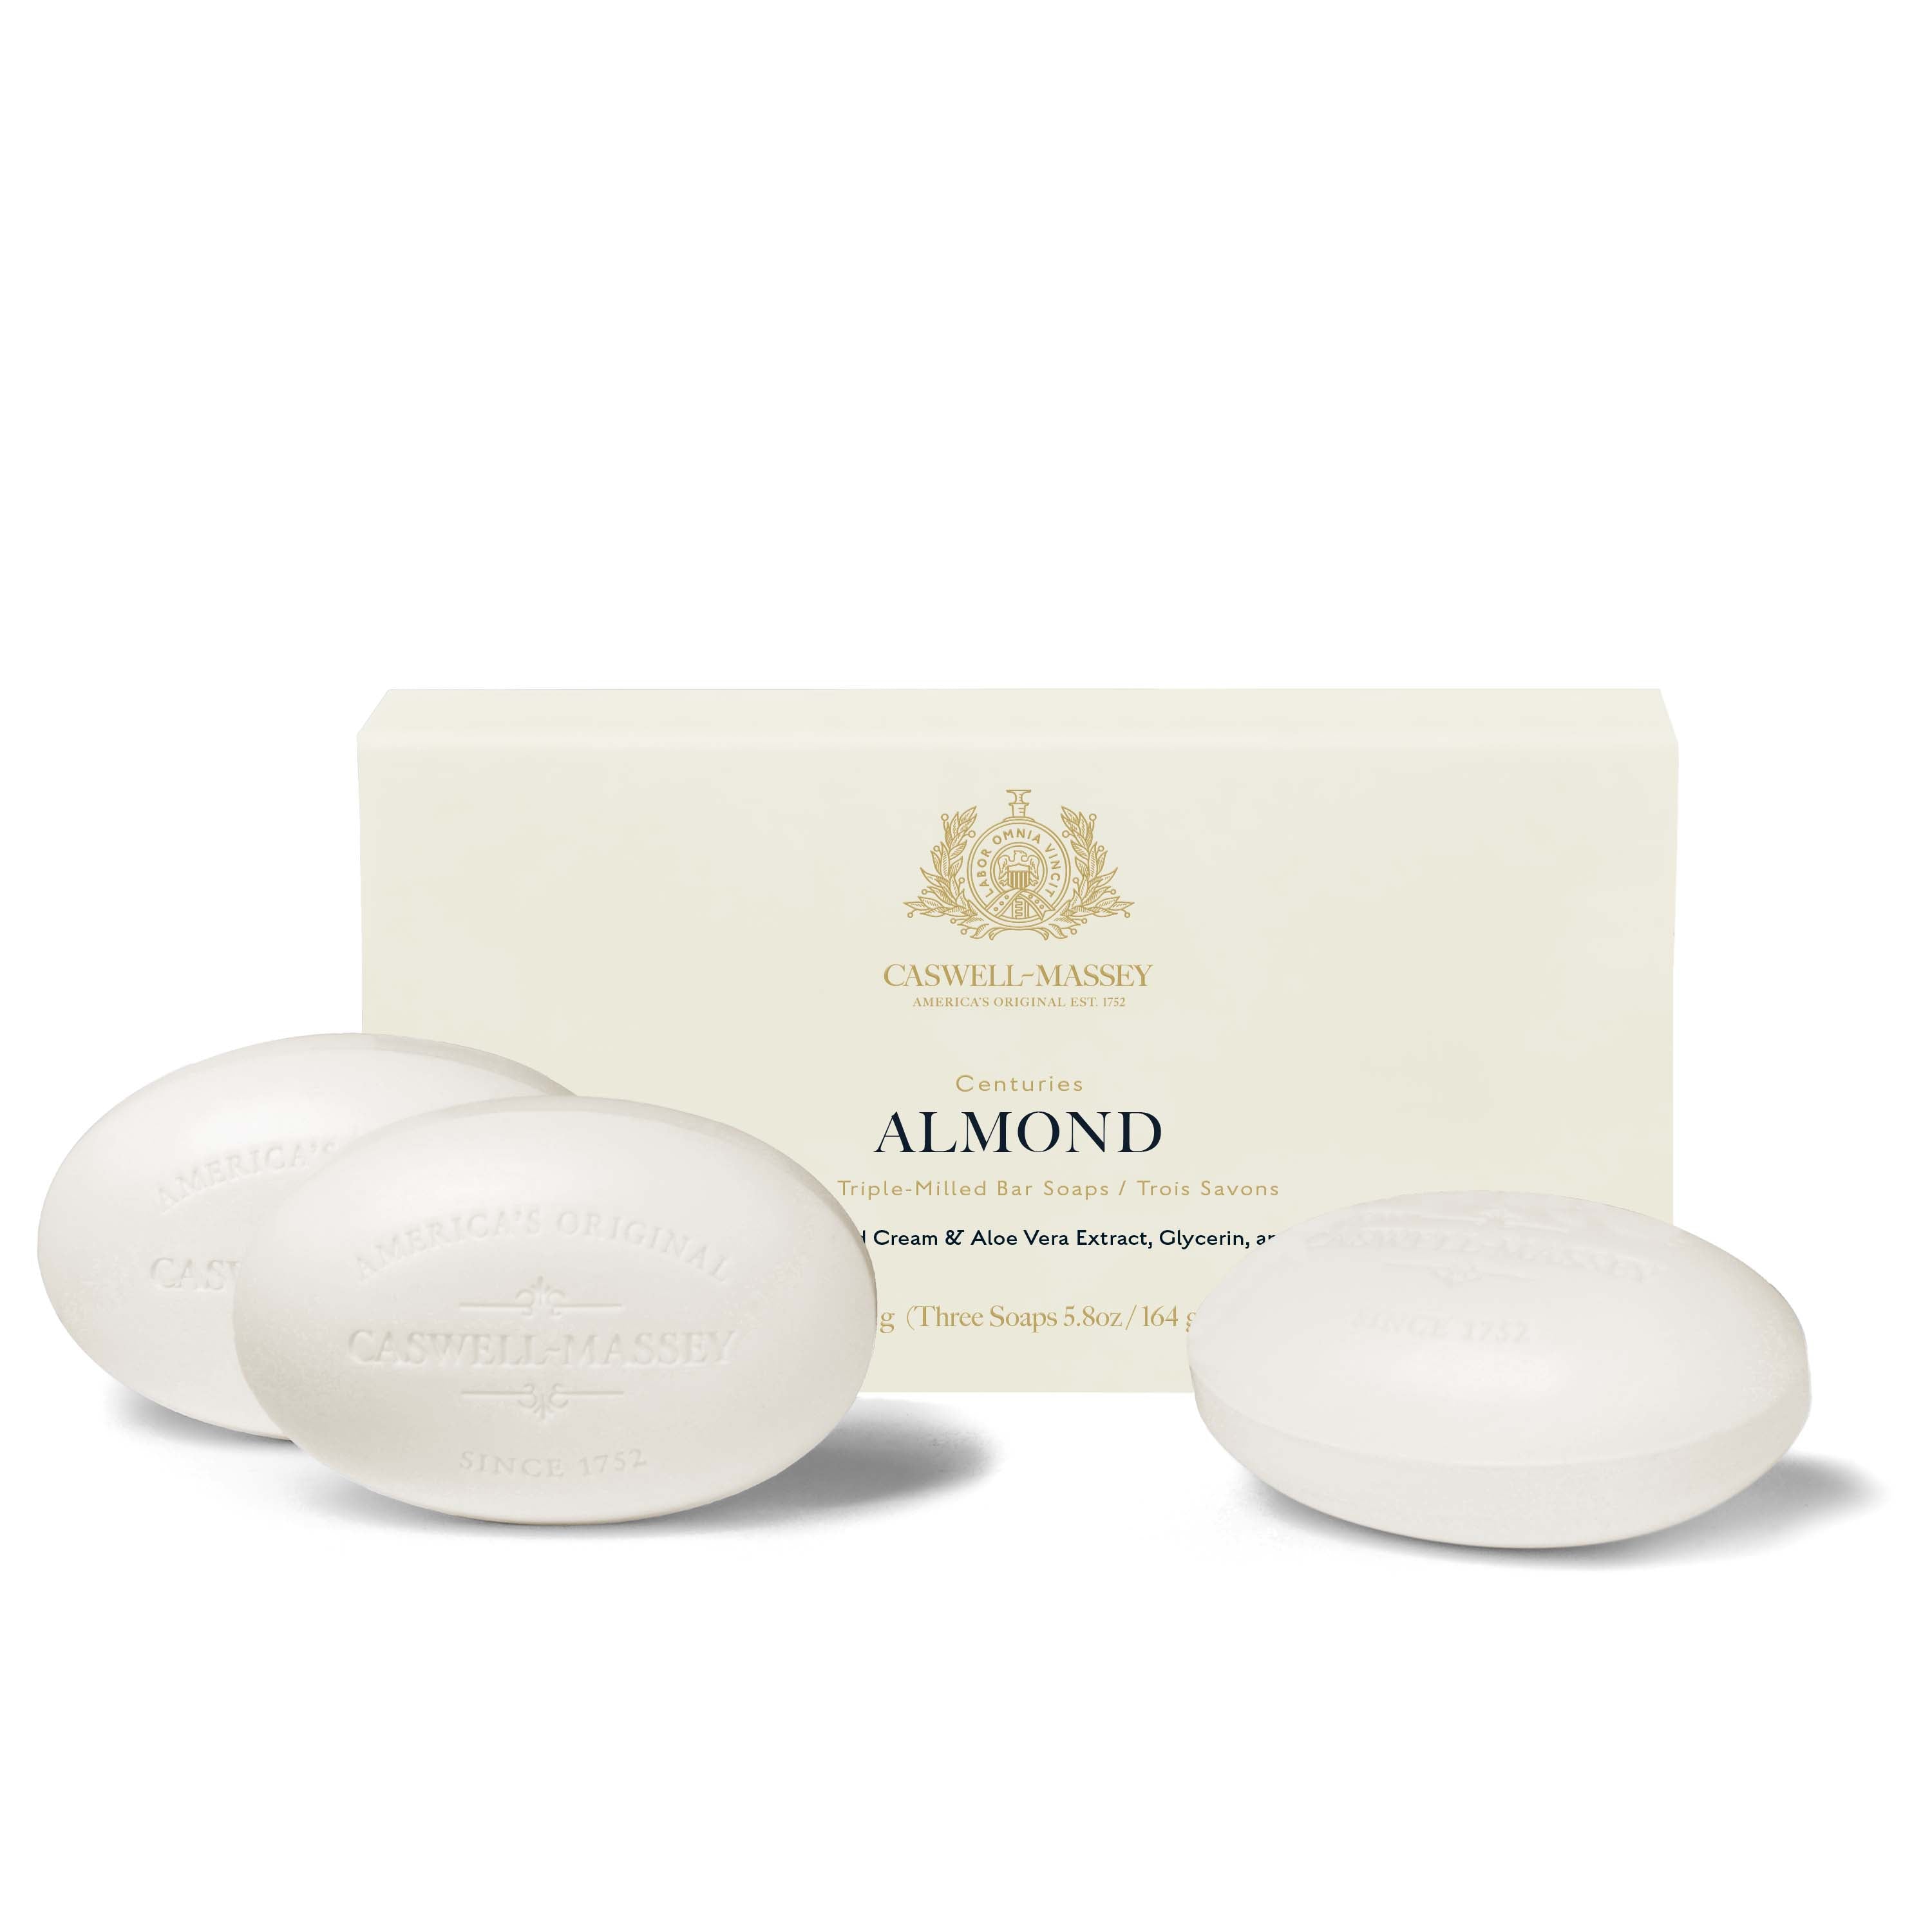 Caswell-Massey® Centuries Almond 3-Soap Set shown next to cream gift box alongside white bars of soap